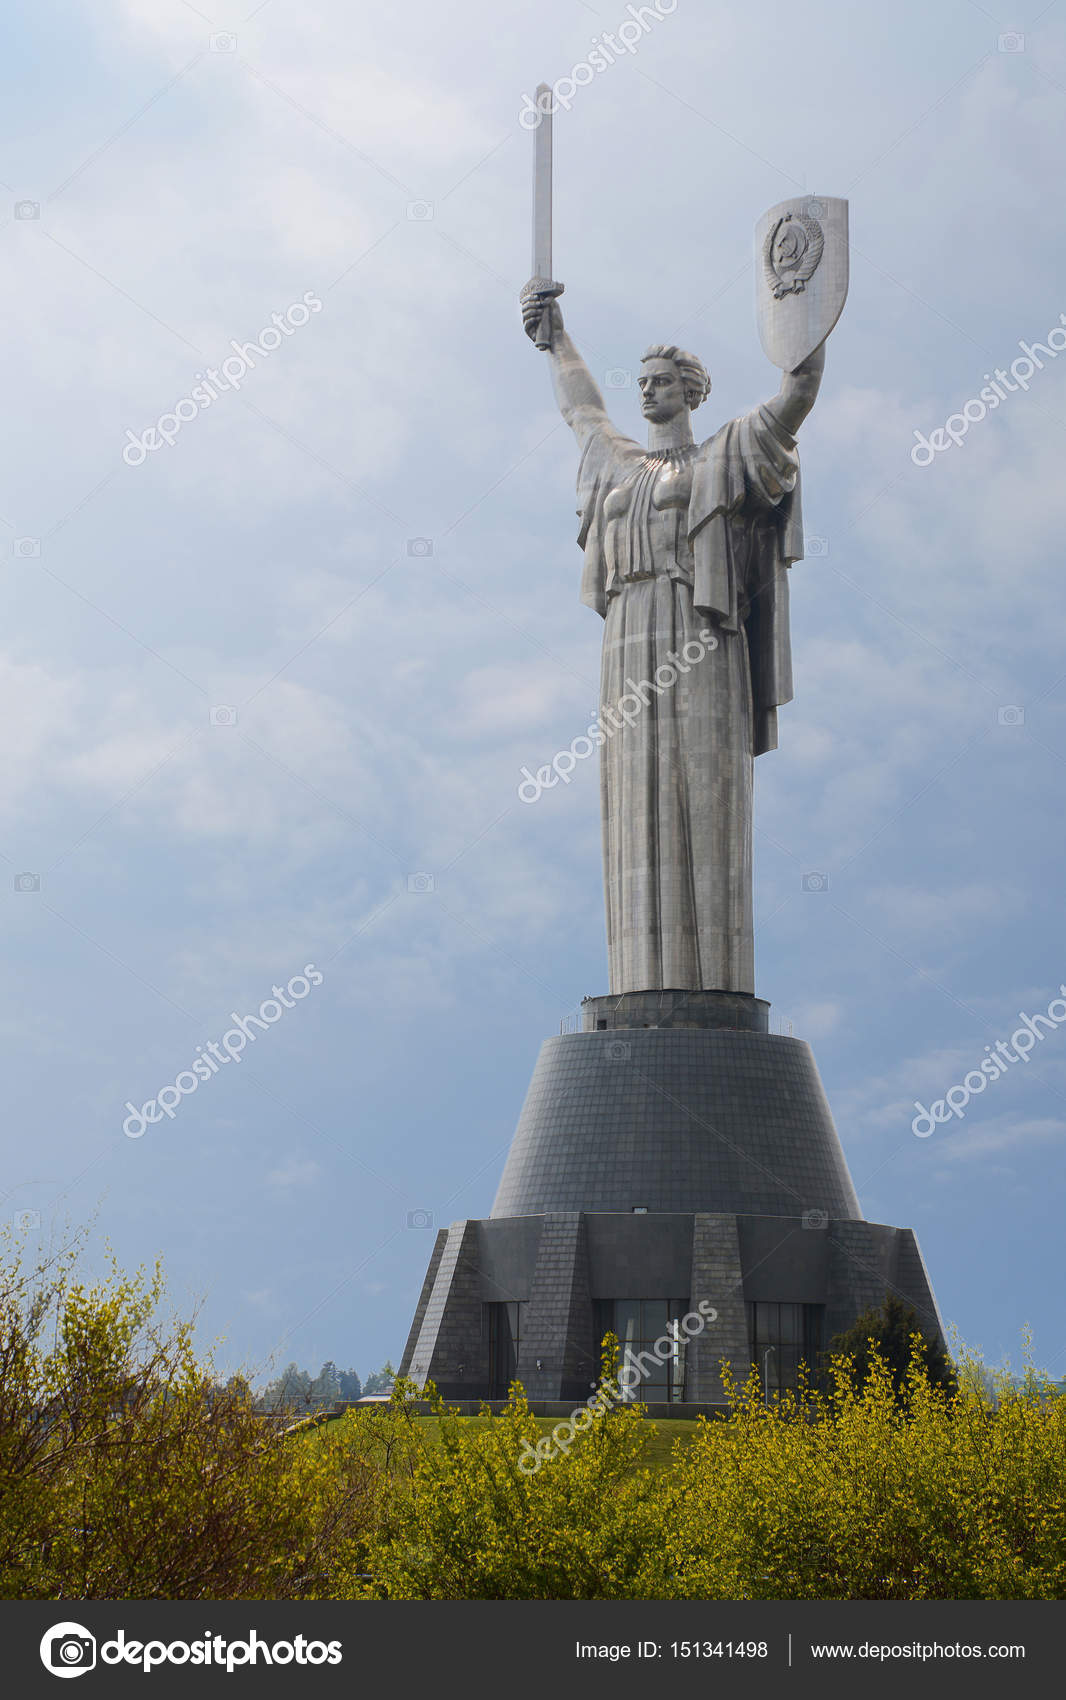 Kiev Ukraine April 16 17 The Motherland Monument Also Known As Rodina Mat Devoted The Great Patriotic War Monumental Statue Of The Mother Motherland In Kiev Stock Editorial Photo C Cherokee4